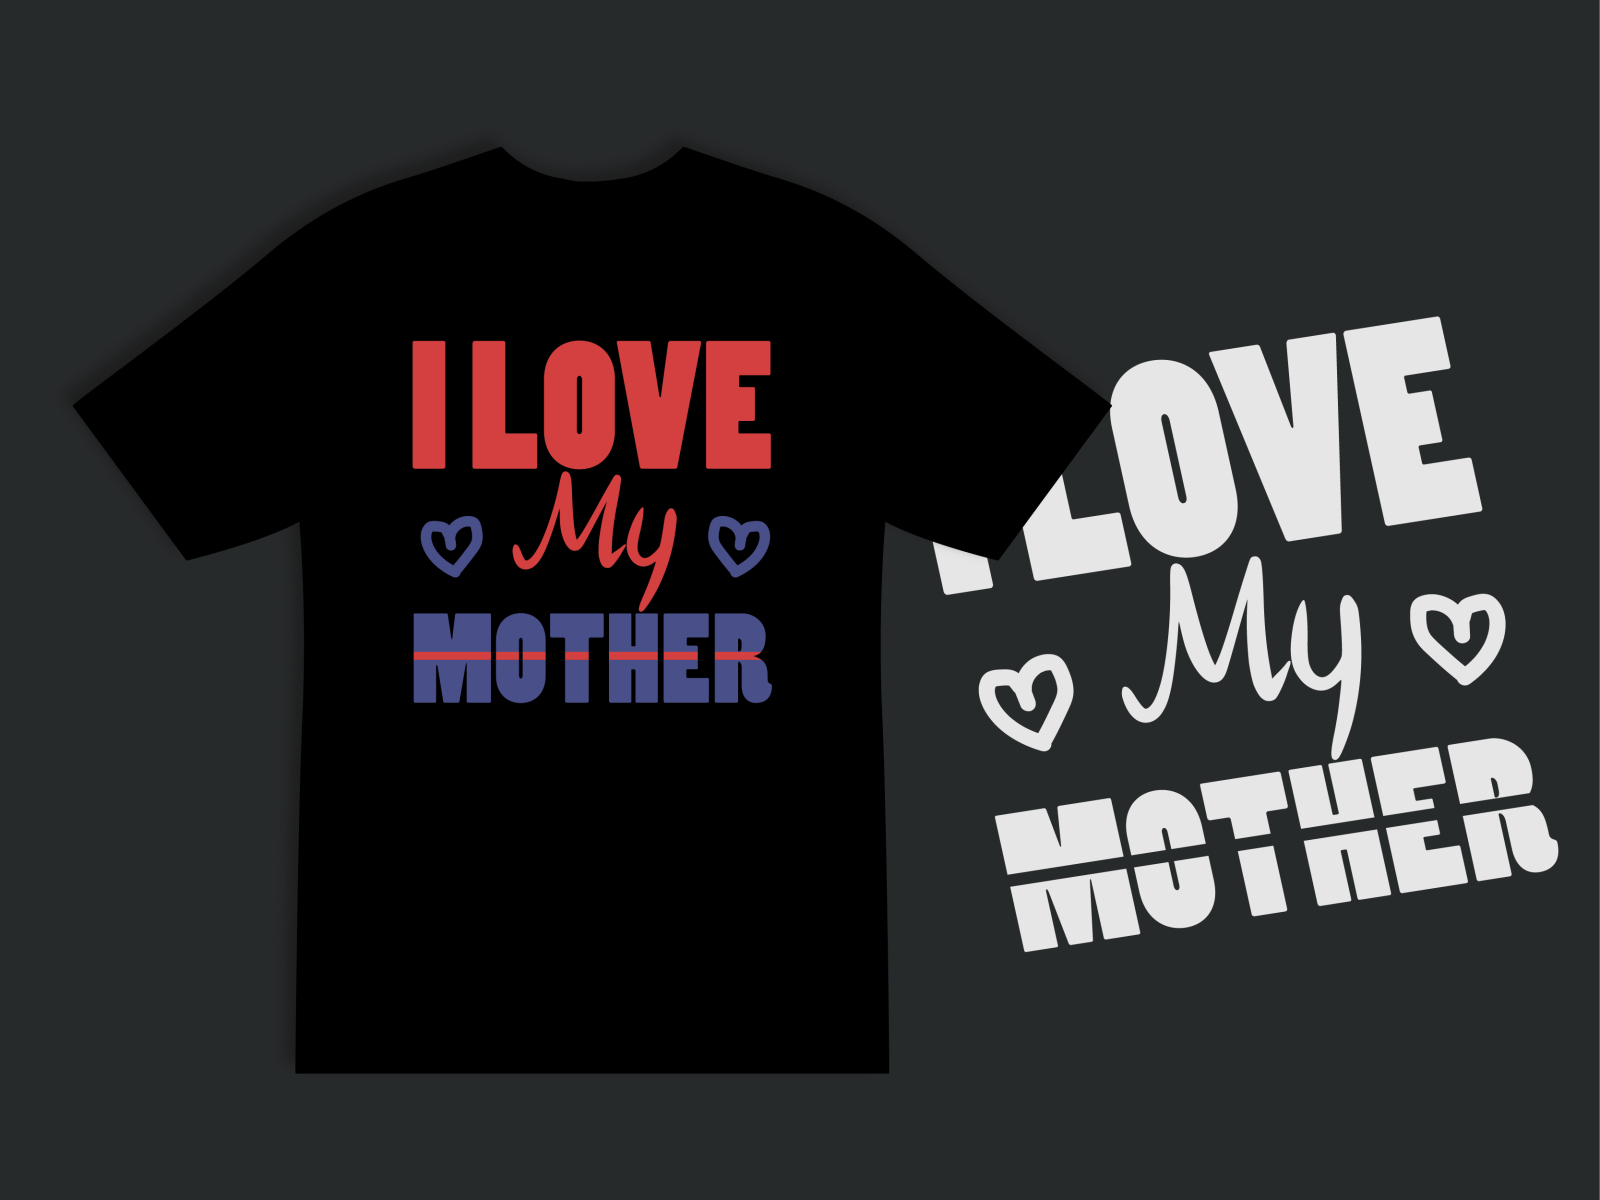 I love my mother t shirt design by T Design on Dribbble